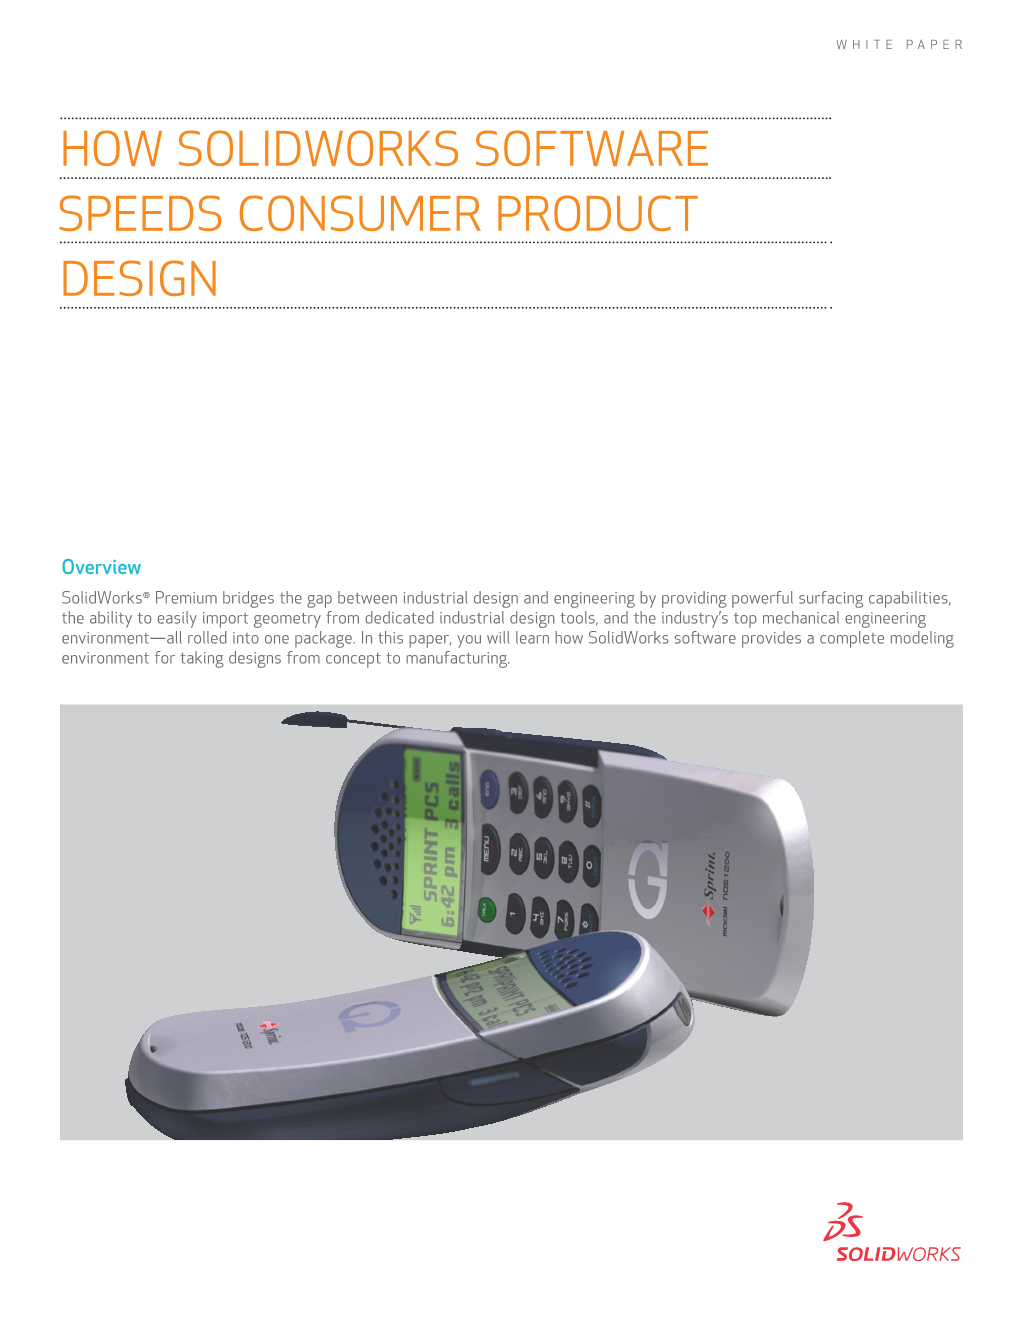 How Solidworks Software Speeds Consumer Product Design